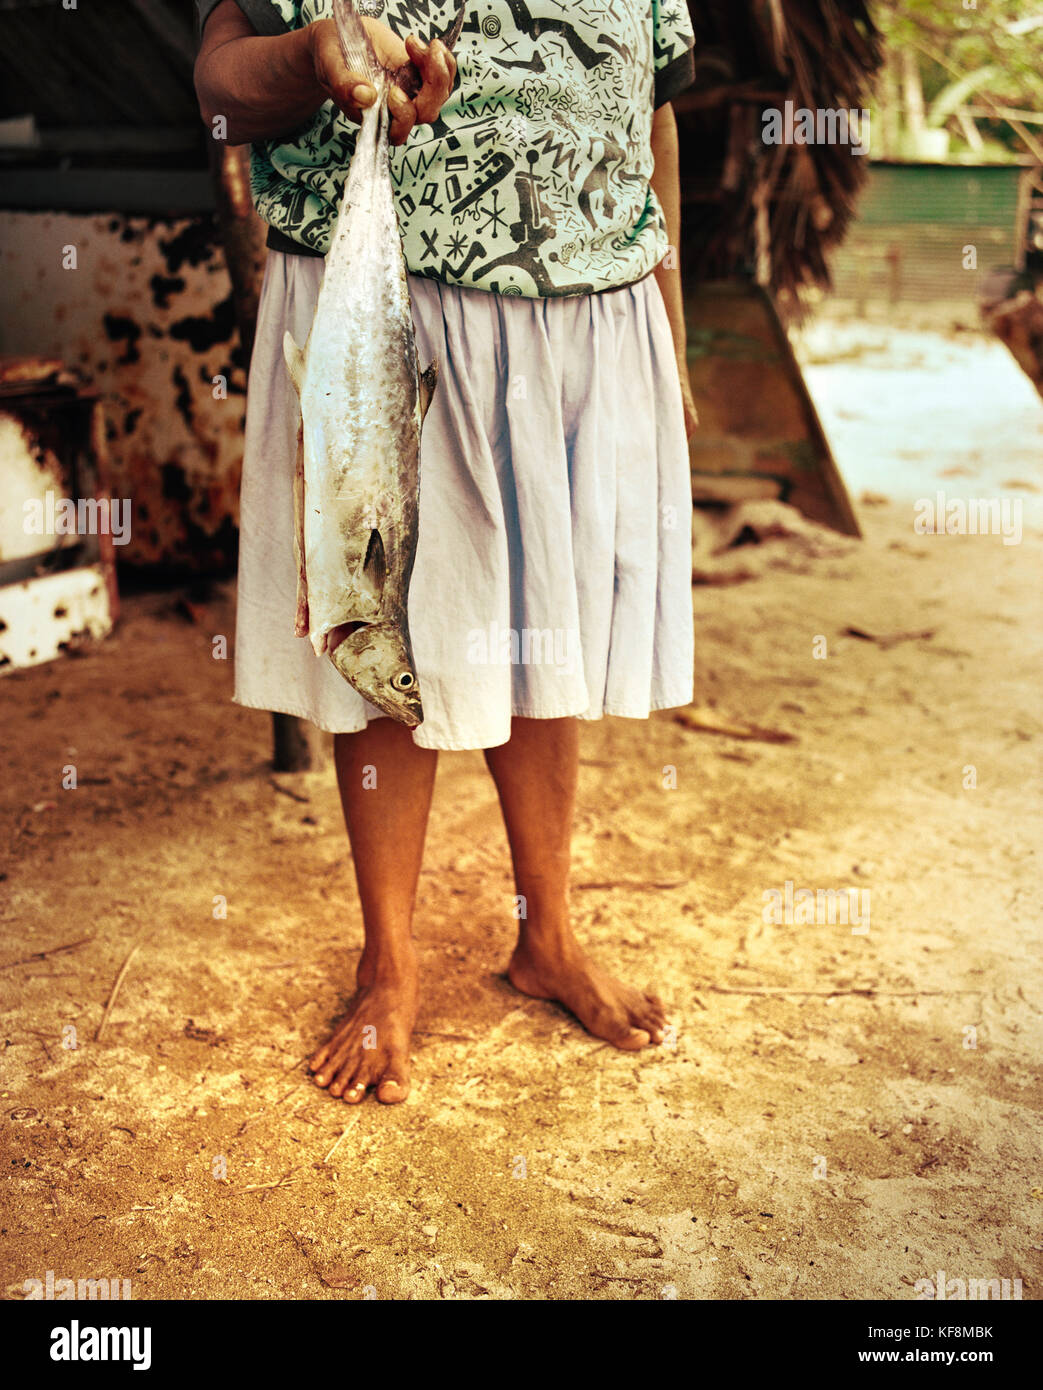 PANAMA, Isla Bastimentos, a woman gets ready to prepare a fish dinner, Central America Stock Photo